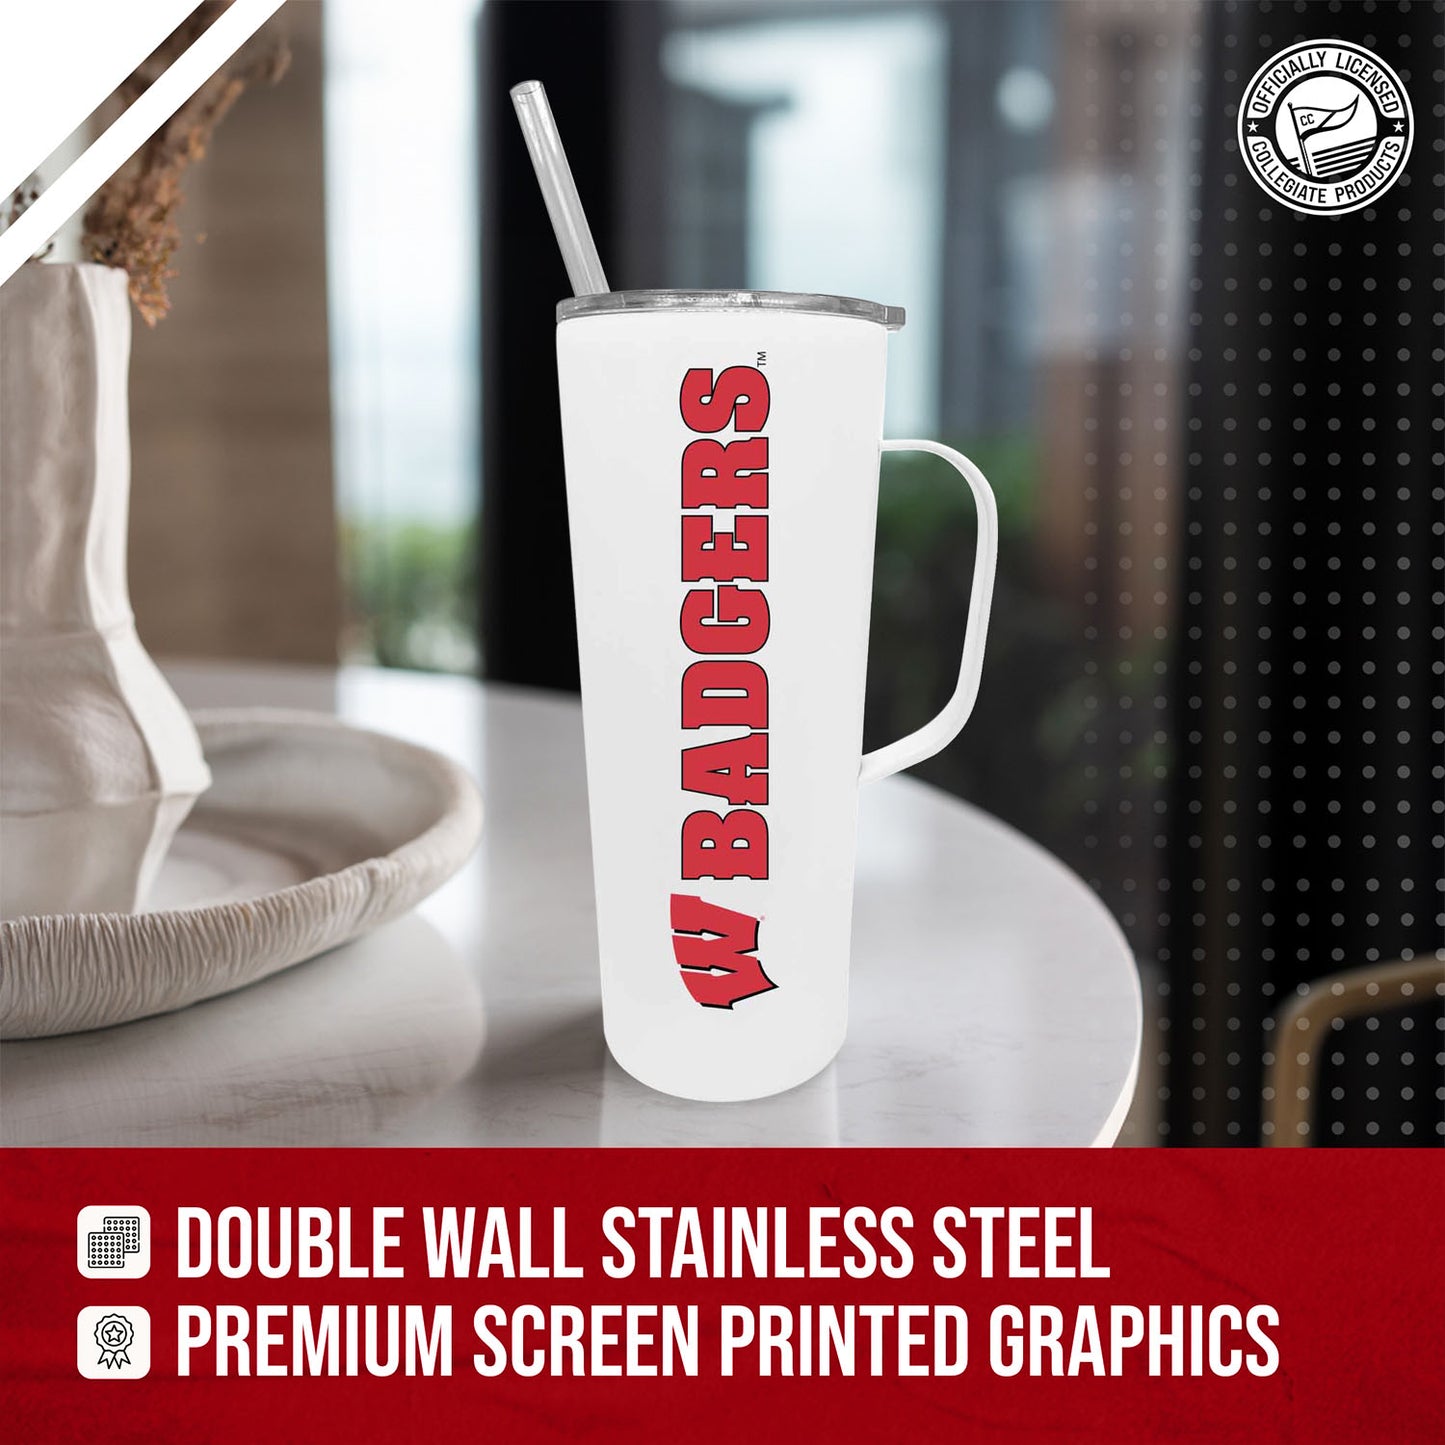 Wisconsin Badgers NCAA Stainless Steel 20oz Roadie With Handle & Dual Option Lid With Straw - White